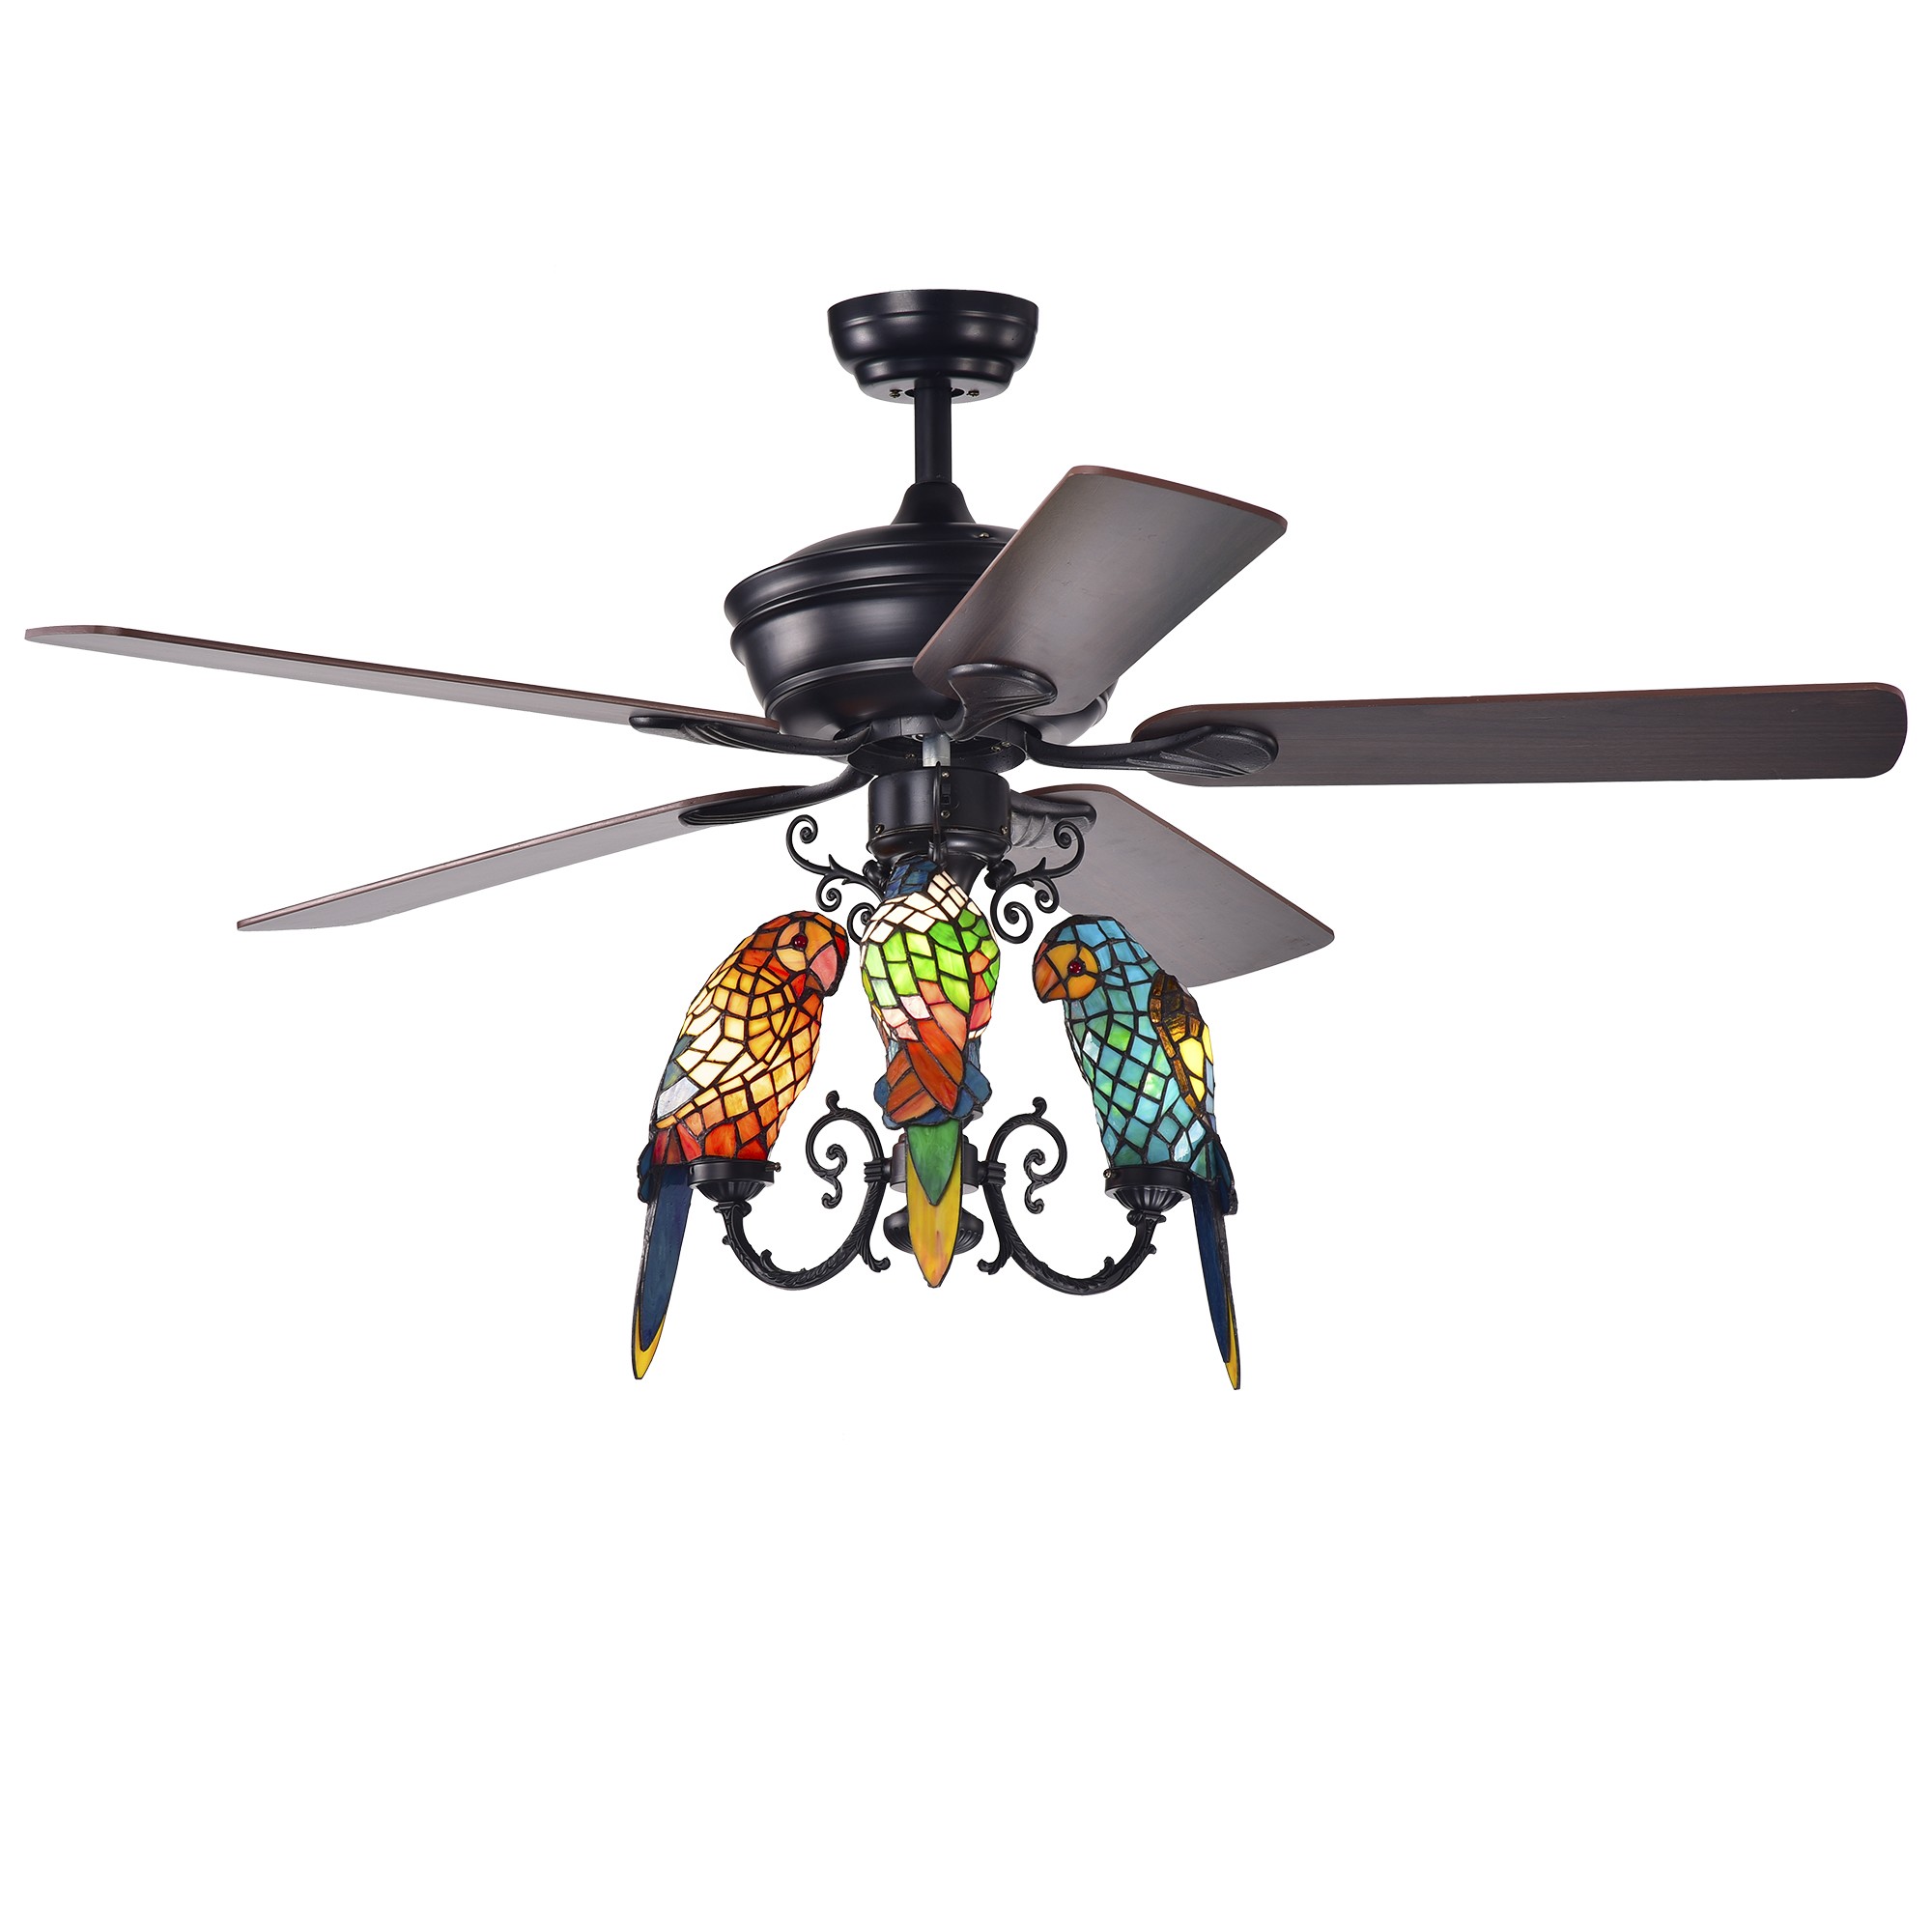 Korubo 52-inch Lighted Ceiling Fan with Tiffany-style Parrot Shades